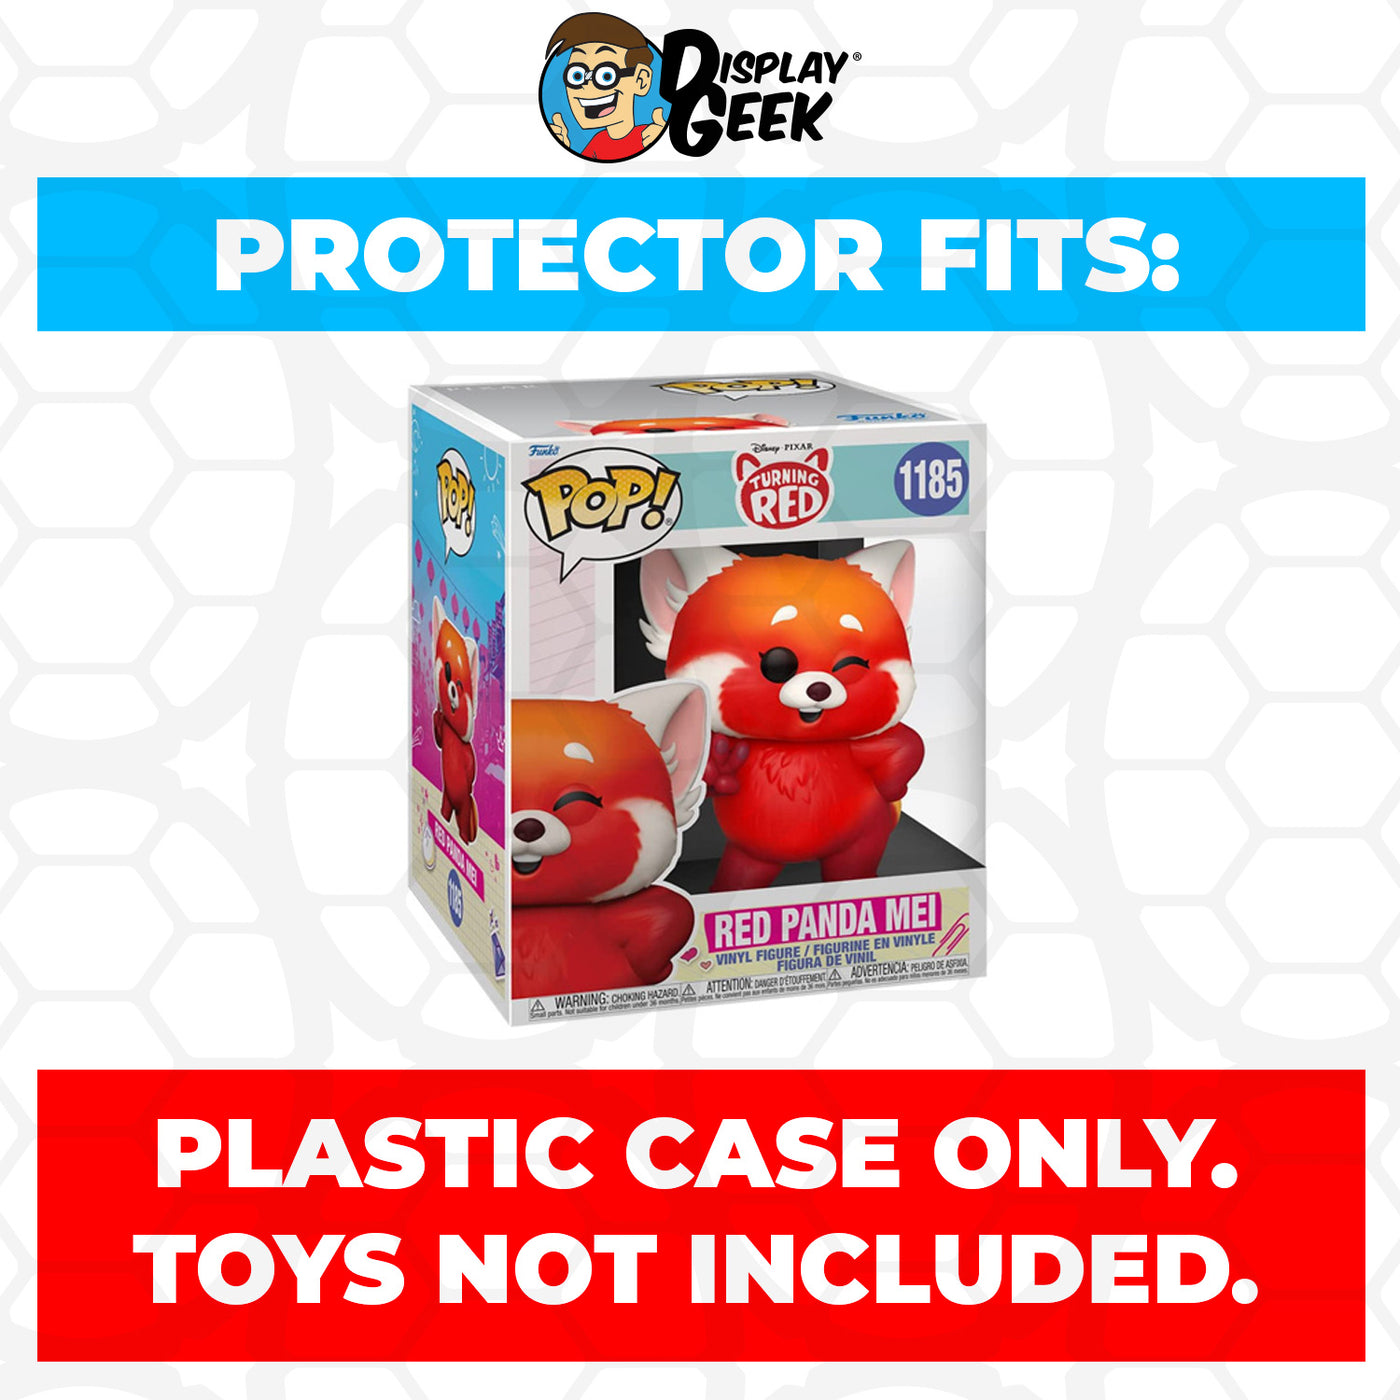 Pop Protector for 6 inch Red Panda Mei #1185 Super Funko Pop on The Protector Guide App by Display Geek